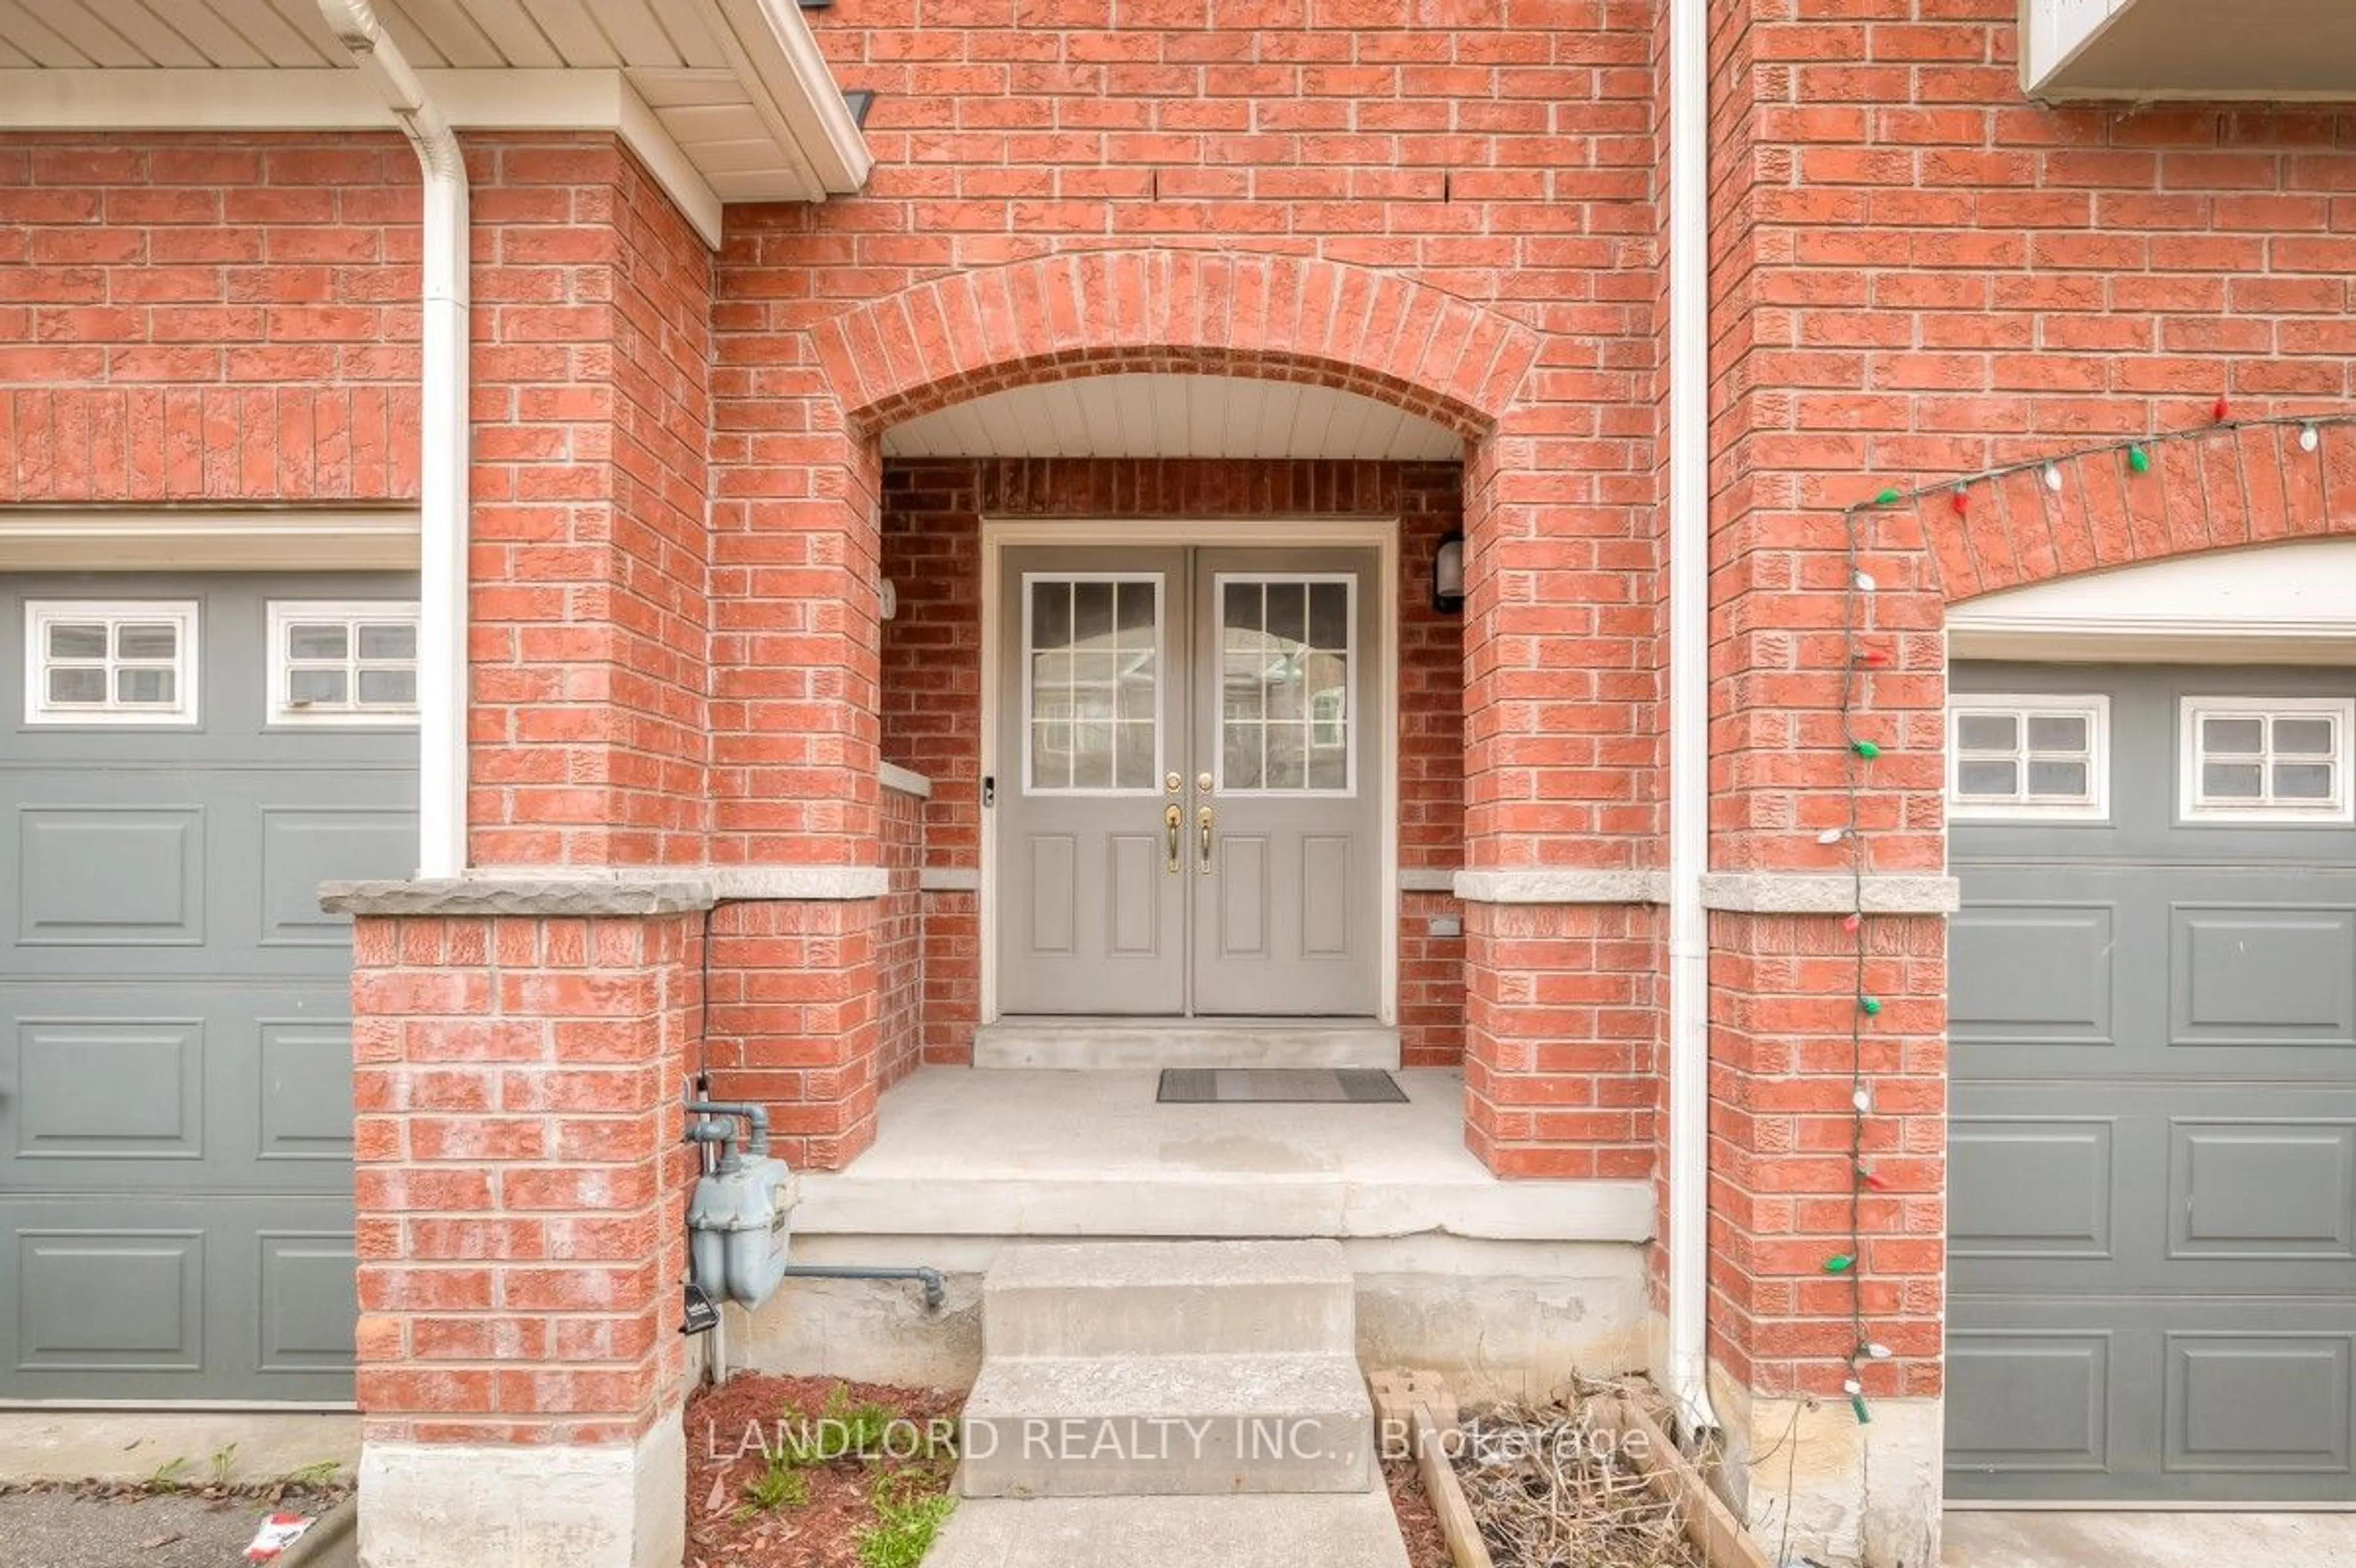 Home with brick exterior material for 13 Masseyfield St, Brampton Ontario L6P 3E1